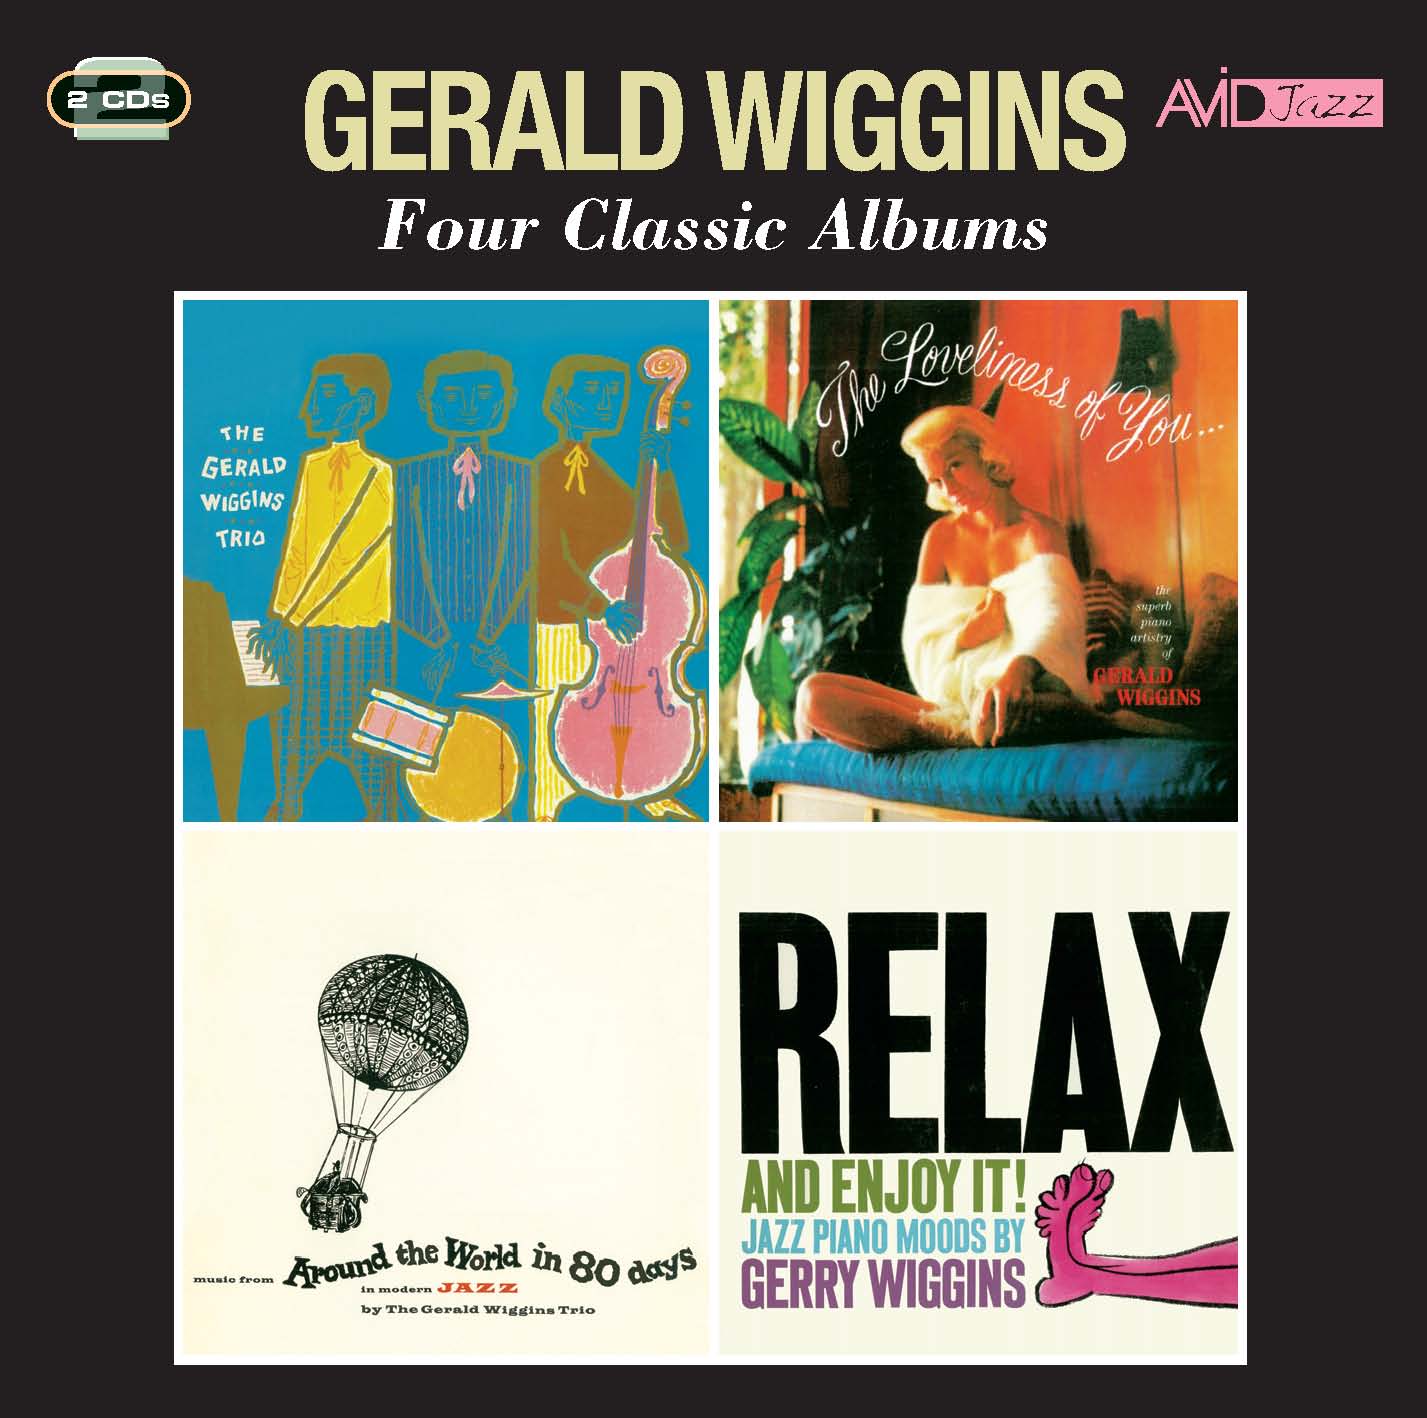 Gerald Wiggins: Four Classic Albums (The Gerald Wiggins Trio The  Loveliness Of You Music From Around The World In Eighty Days Relax And  Enjoy It) (2CD)